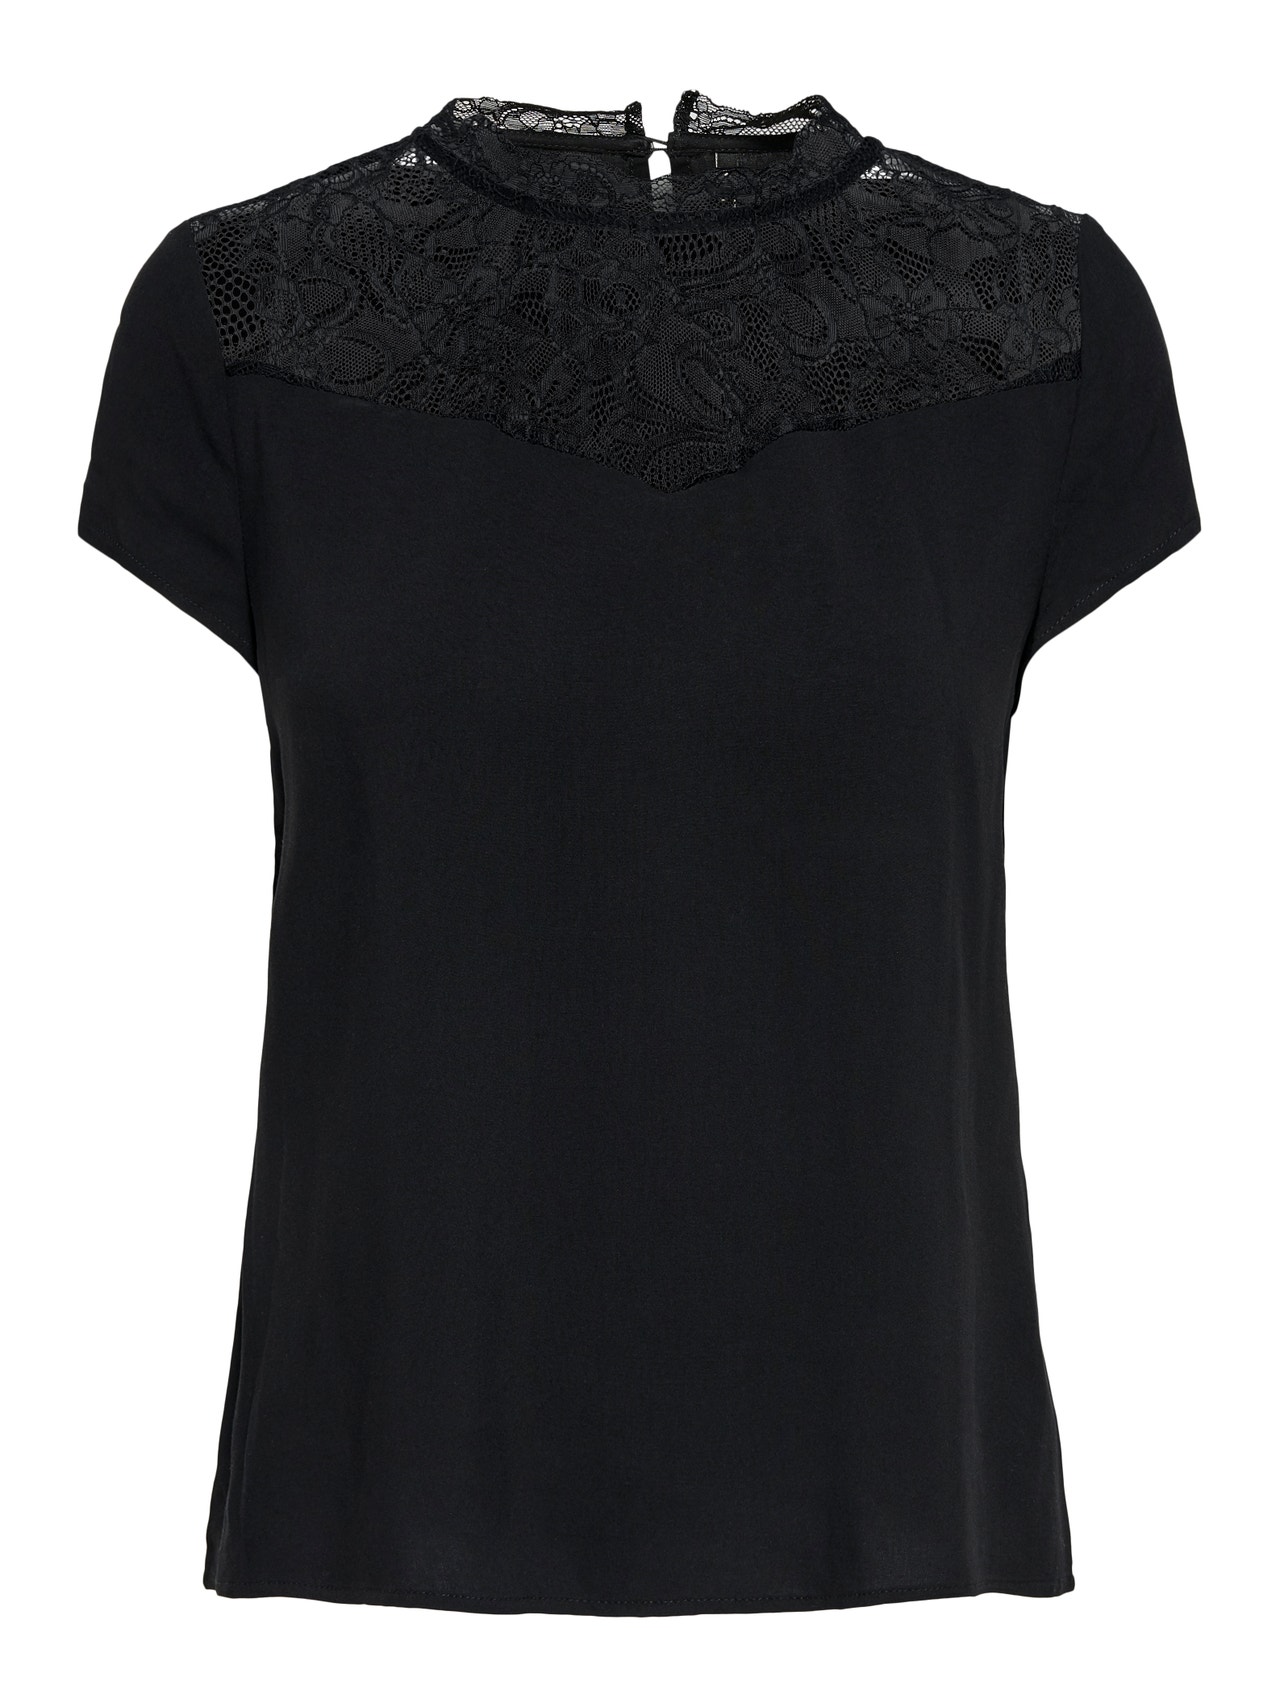 ONLY O-neck top with lace -Black - 15191412